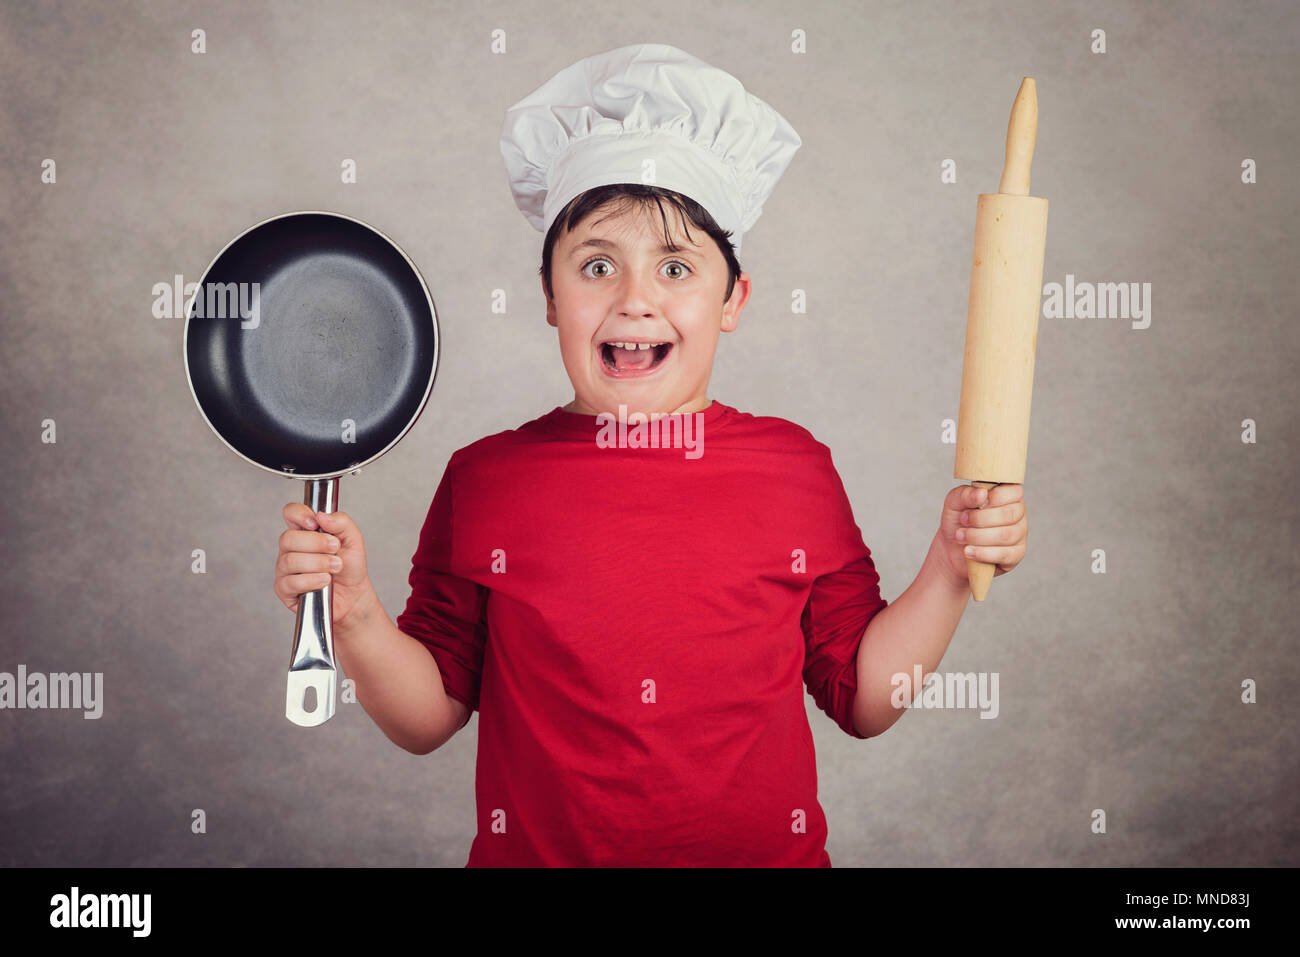 angry cook child on gray background Stock Photo